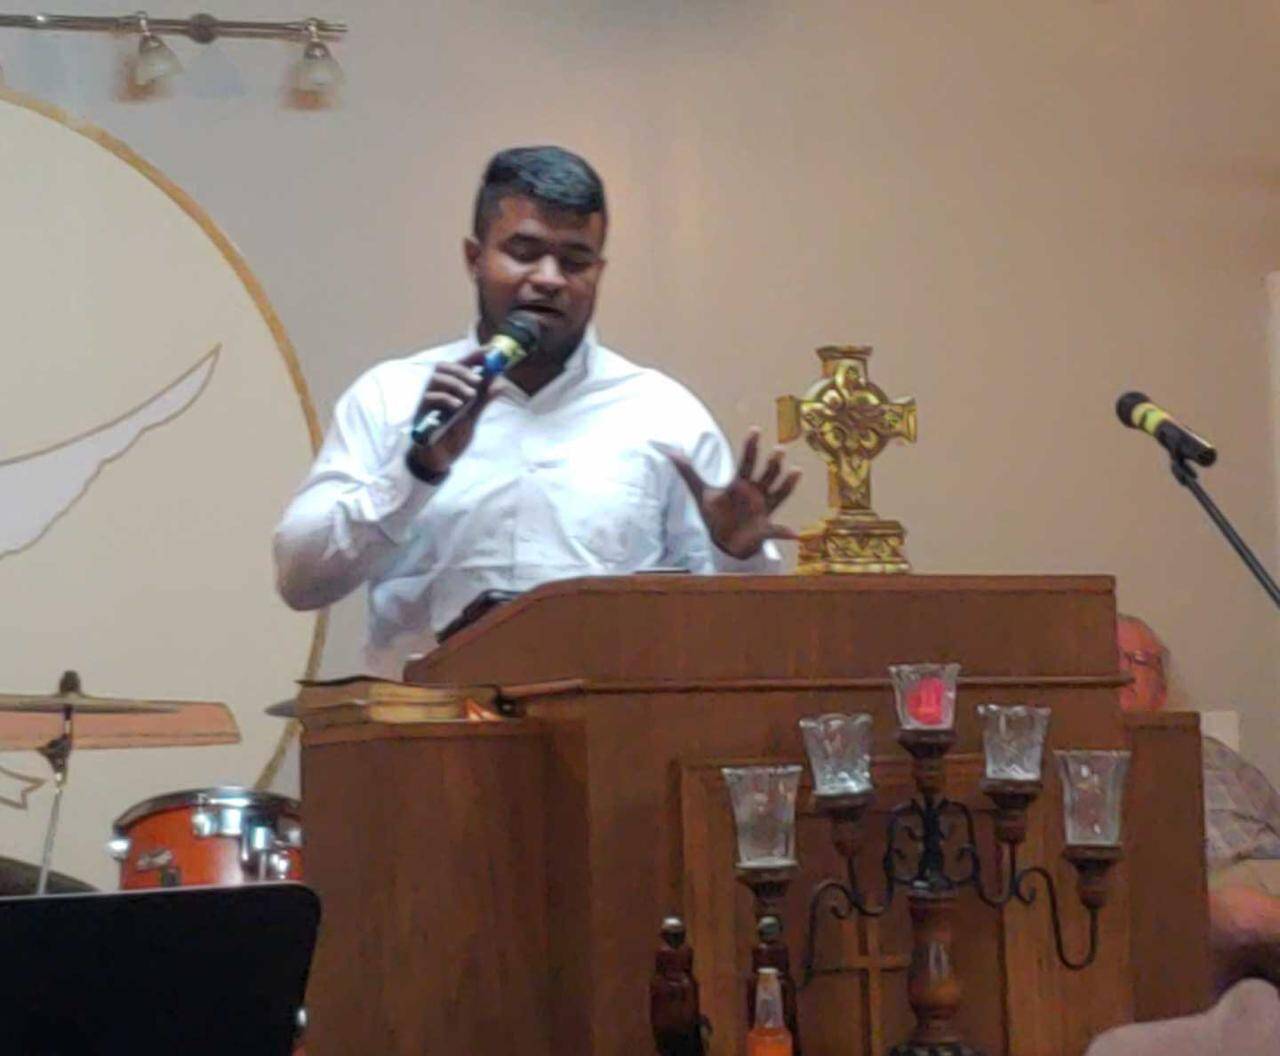 A Christian pastor preaching a sermon on fasting